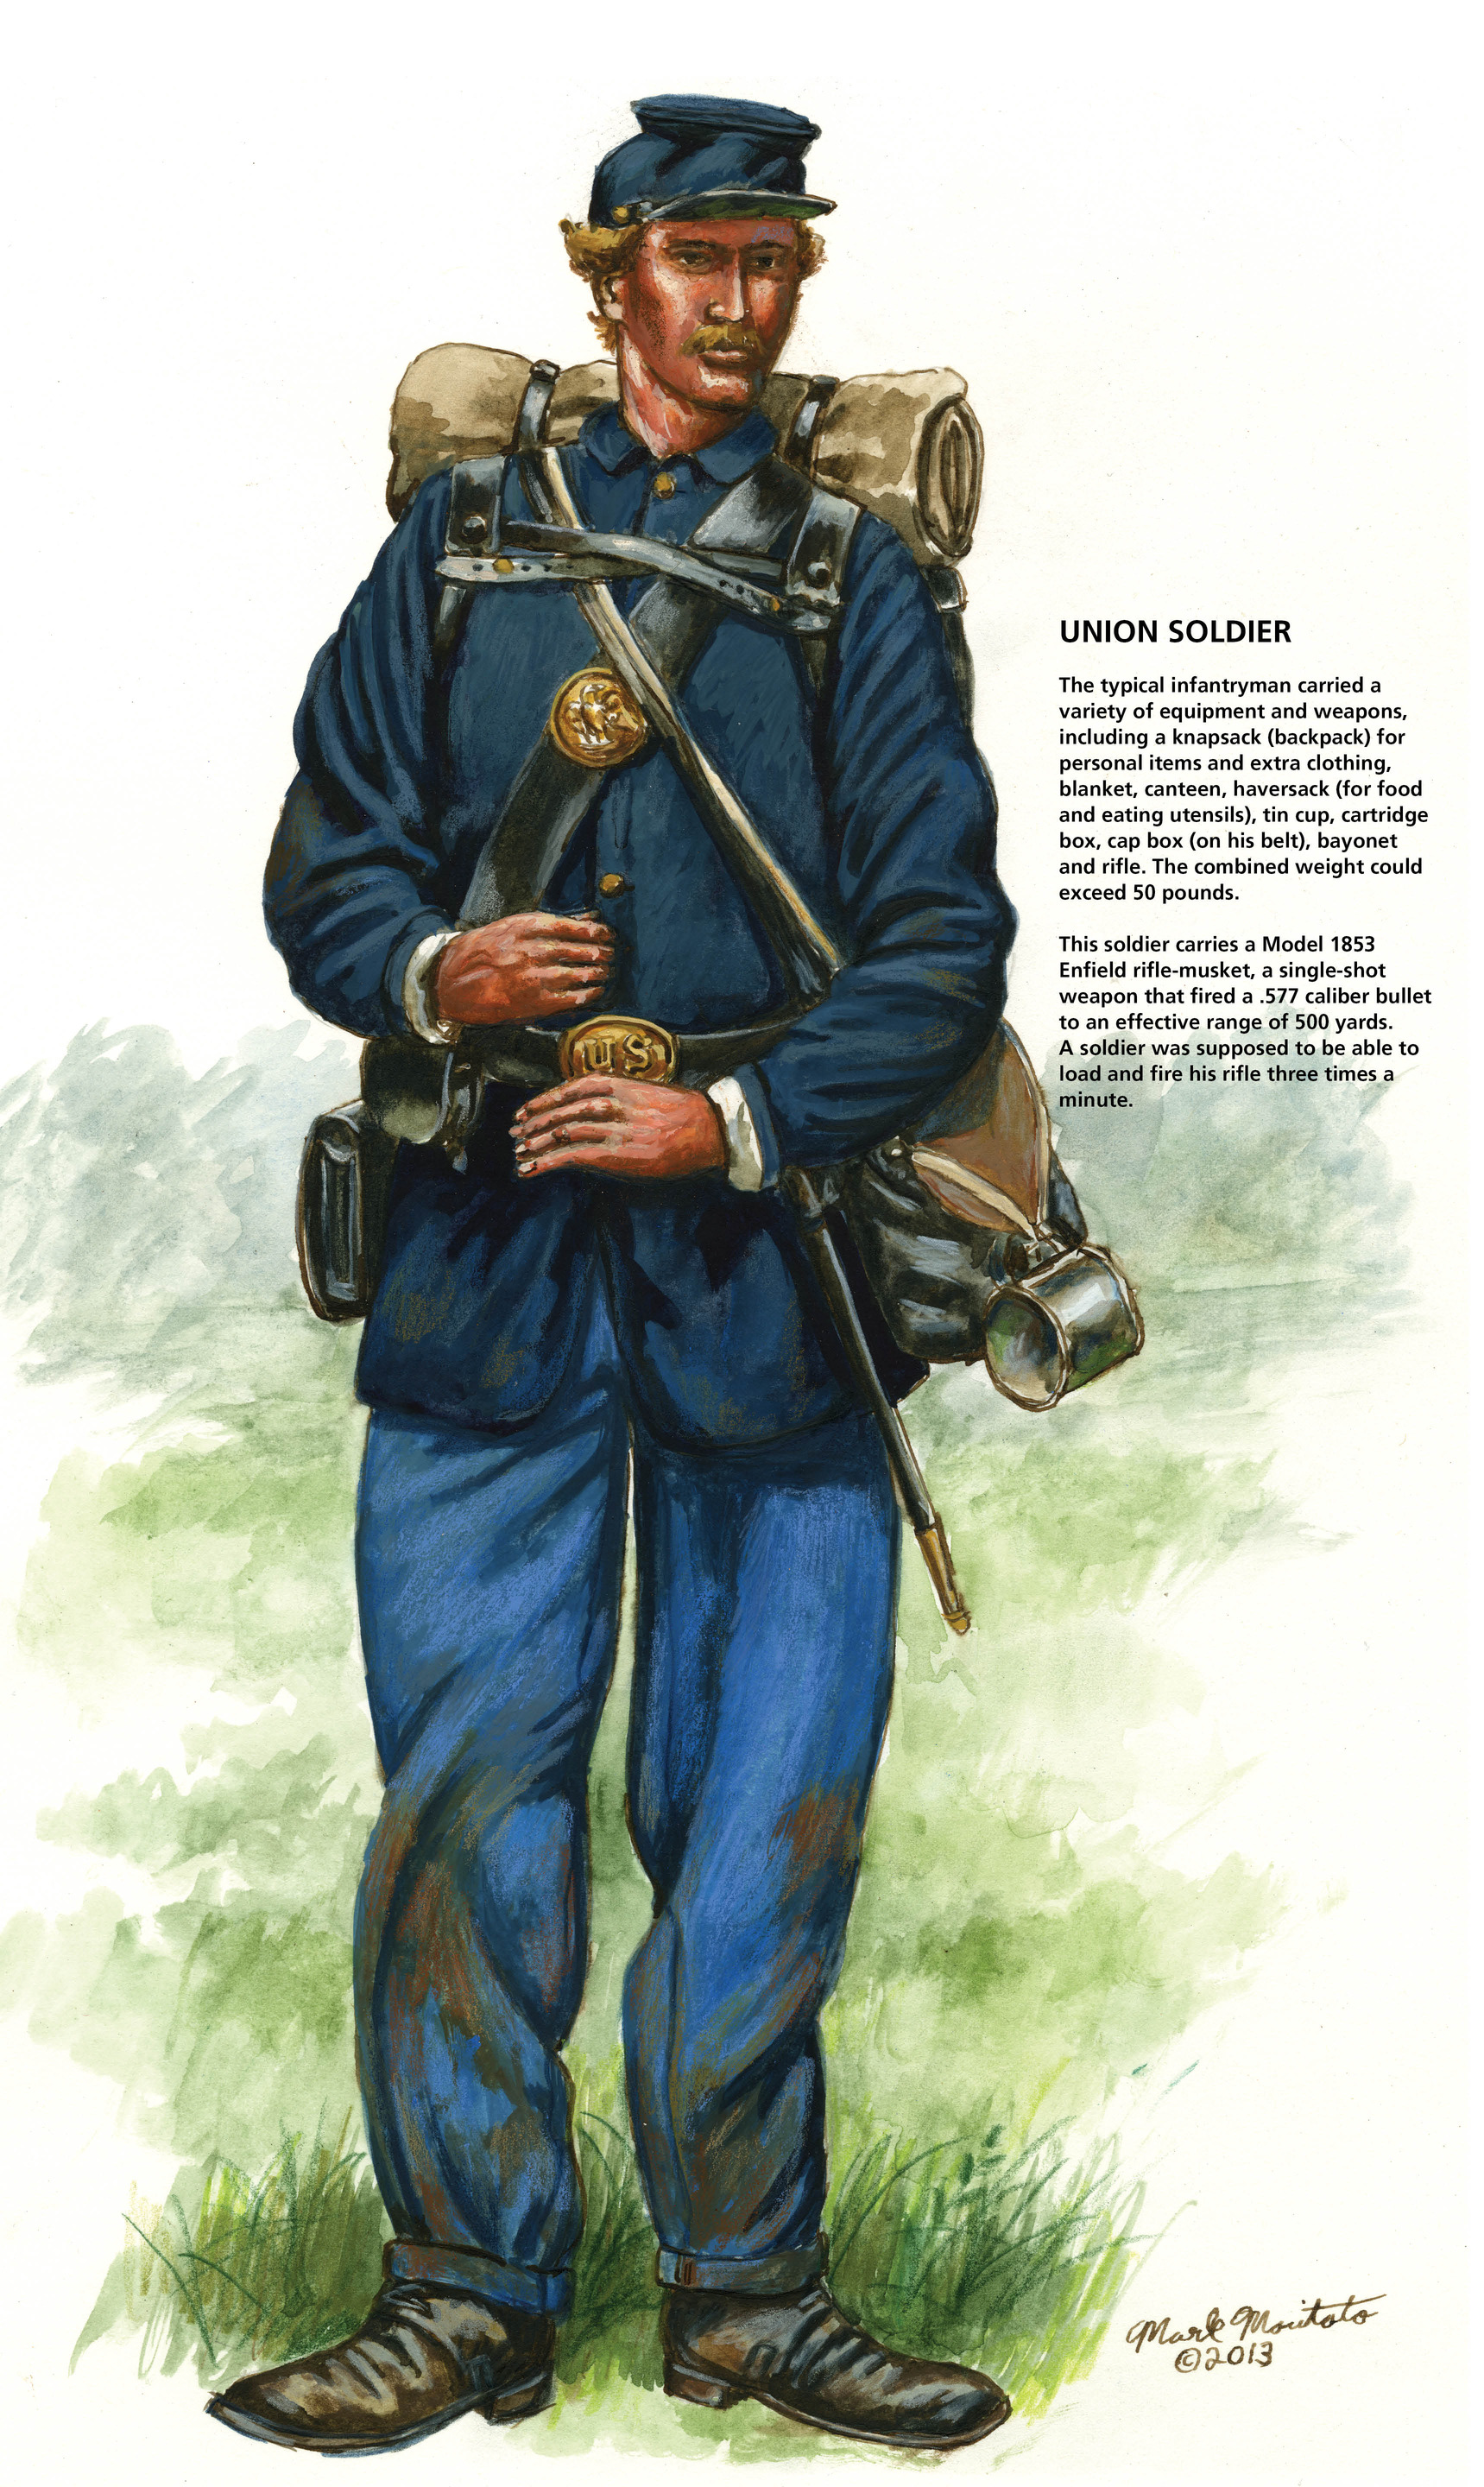 An exhibit panel has an illustration and text description of a 1860s U.S. Army soldier with his uniform and equipment. 